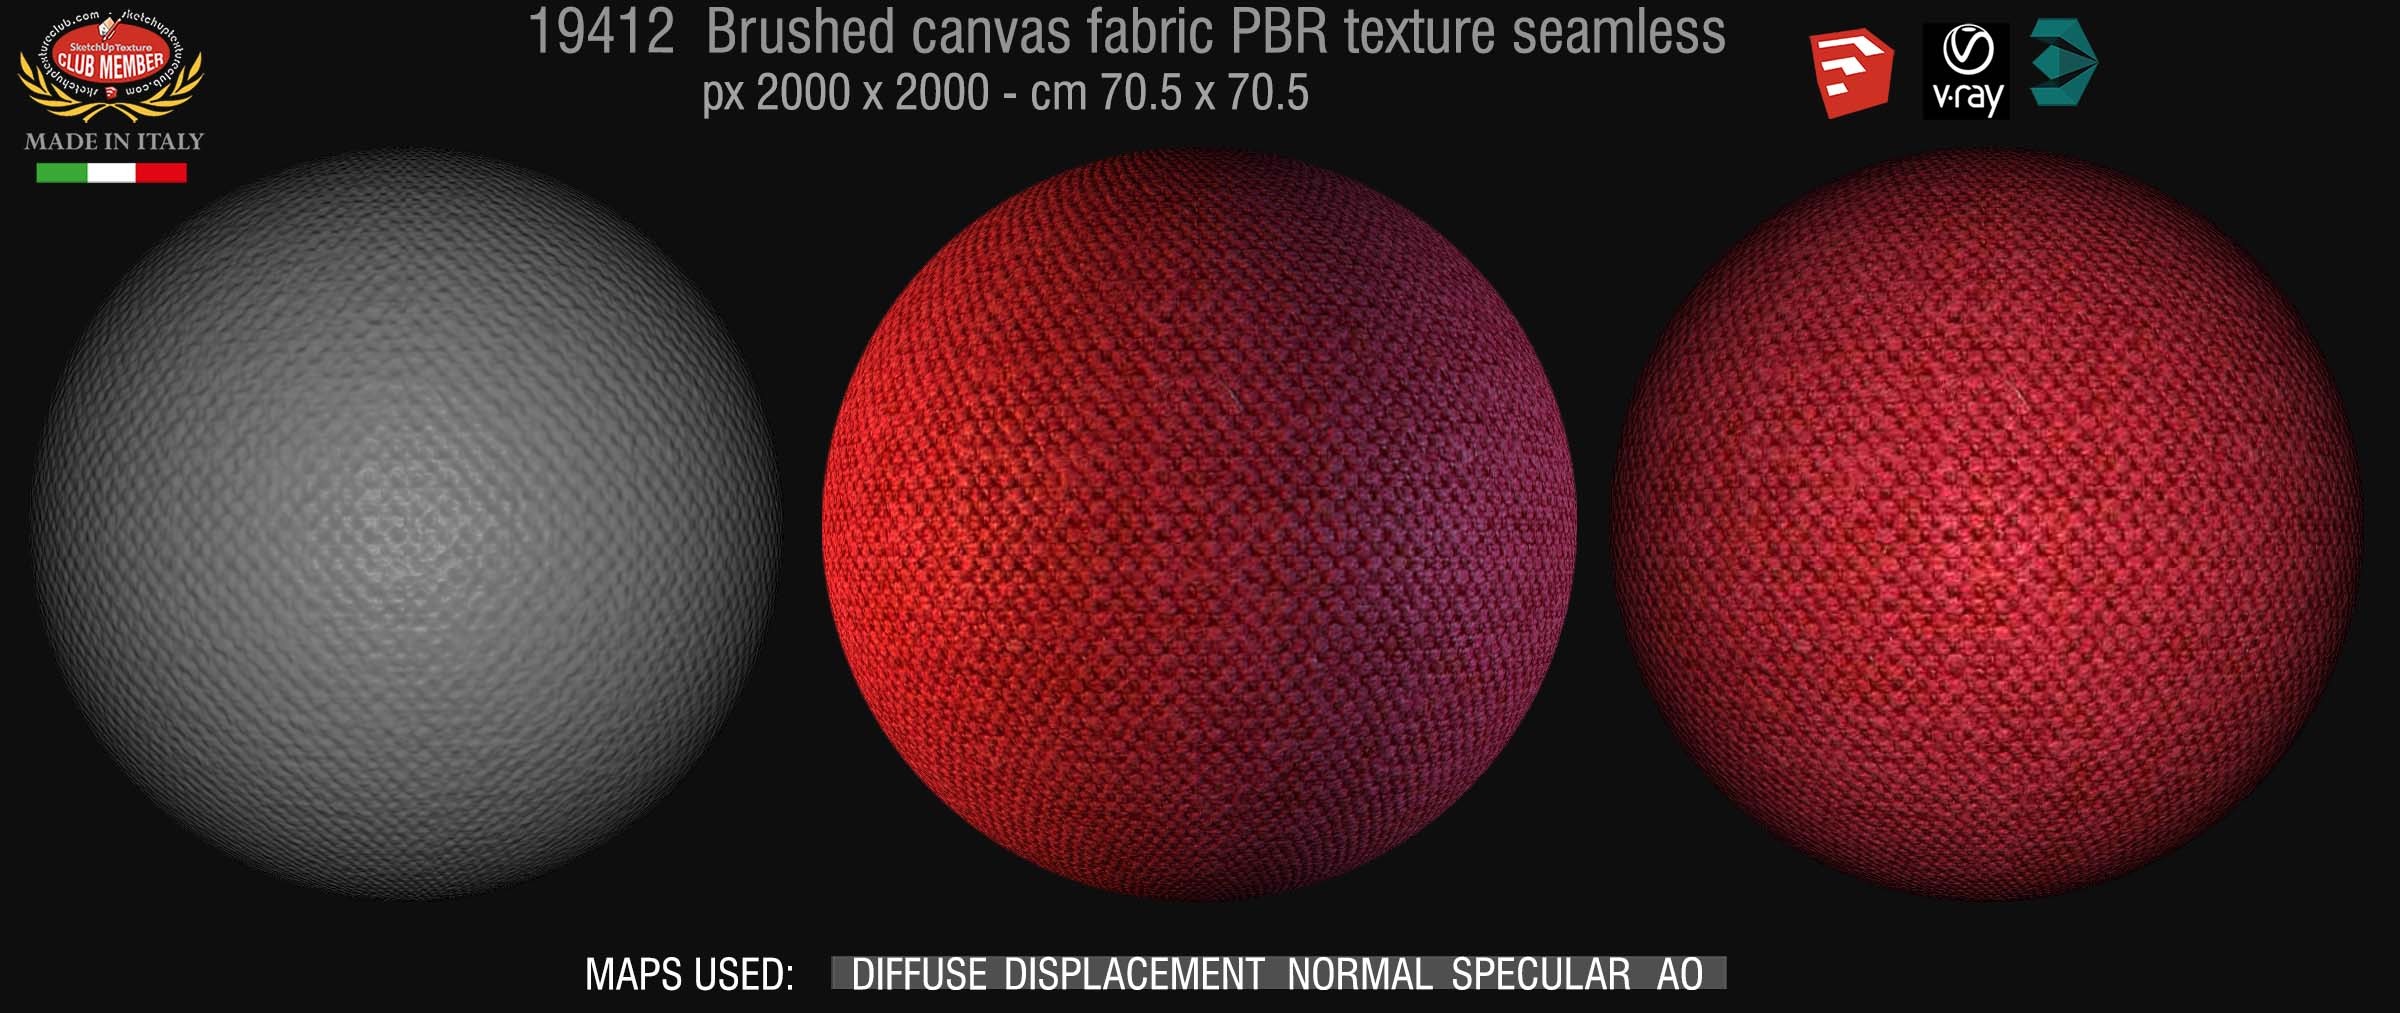 19412 Brushed canvas fabric PBR texture seamless DEMO